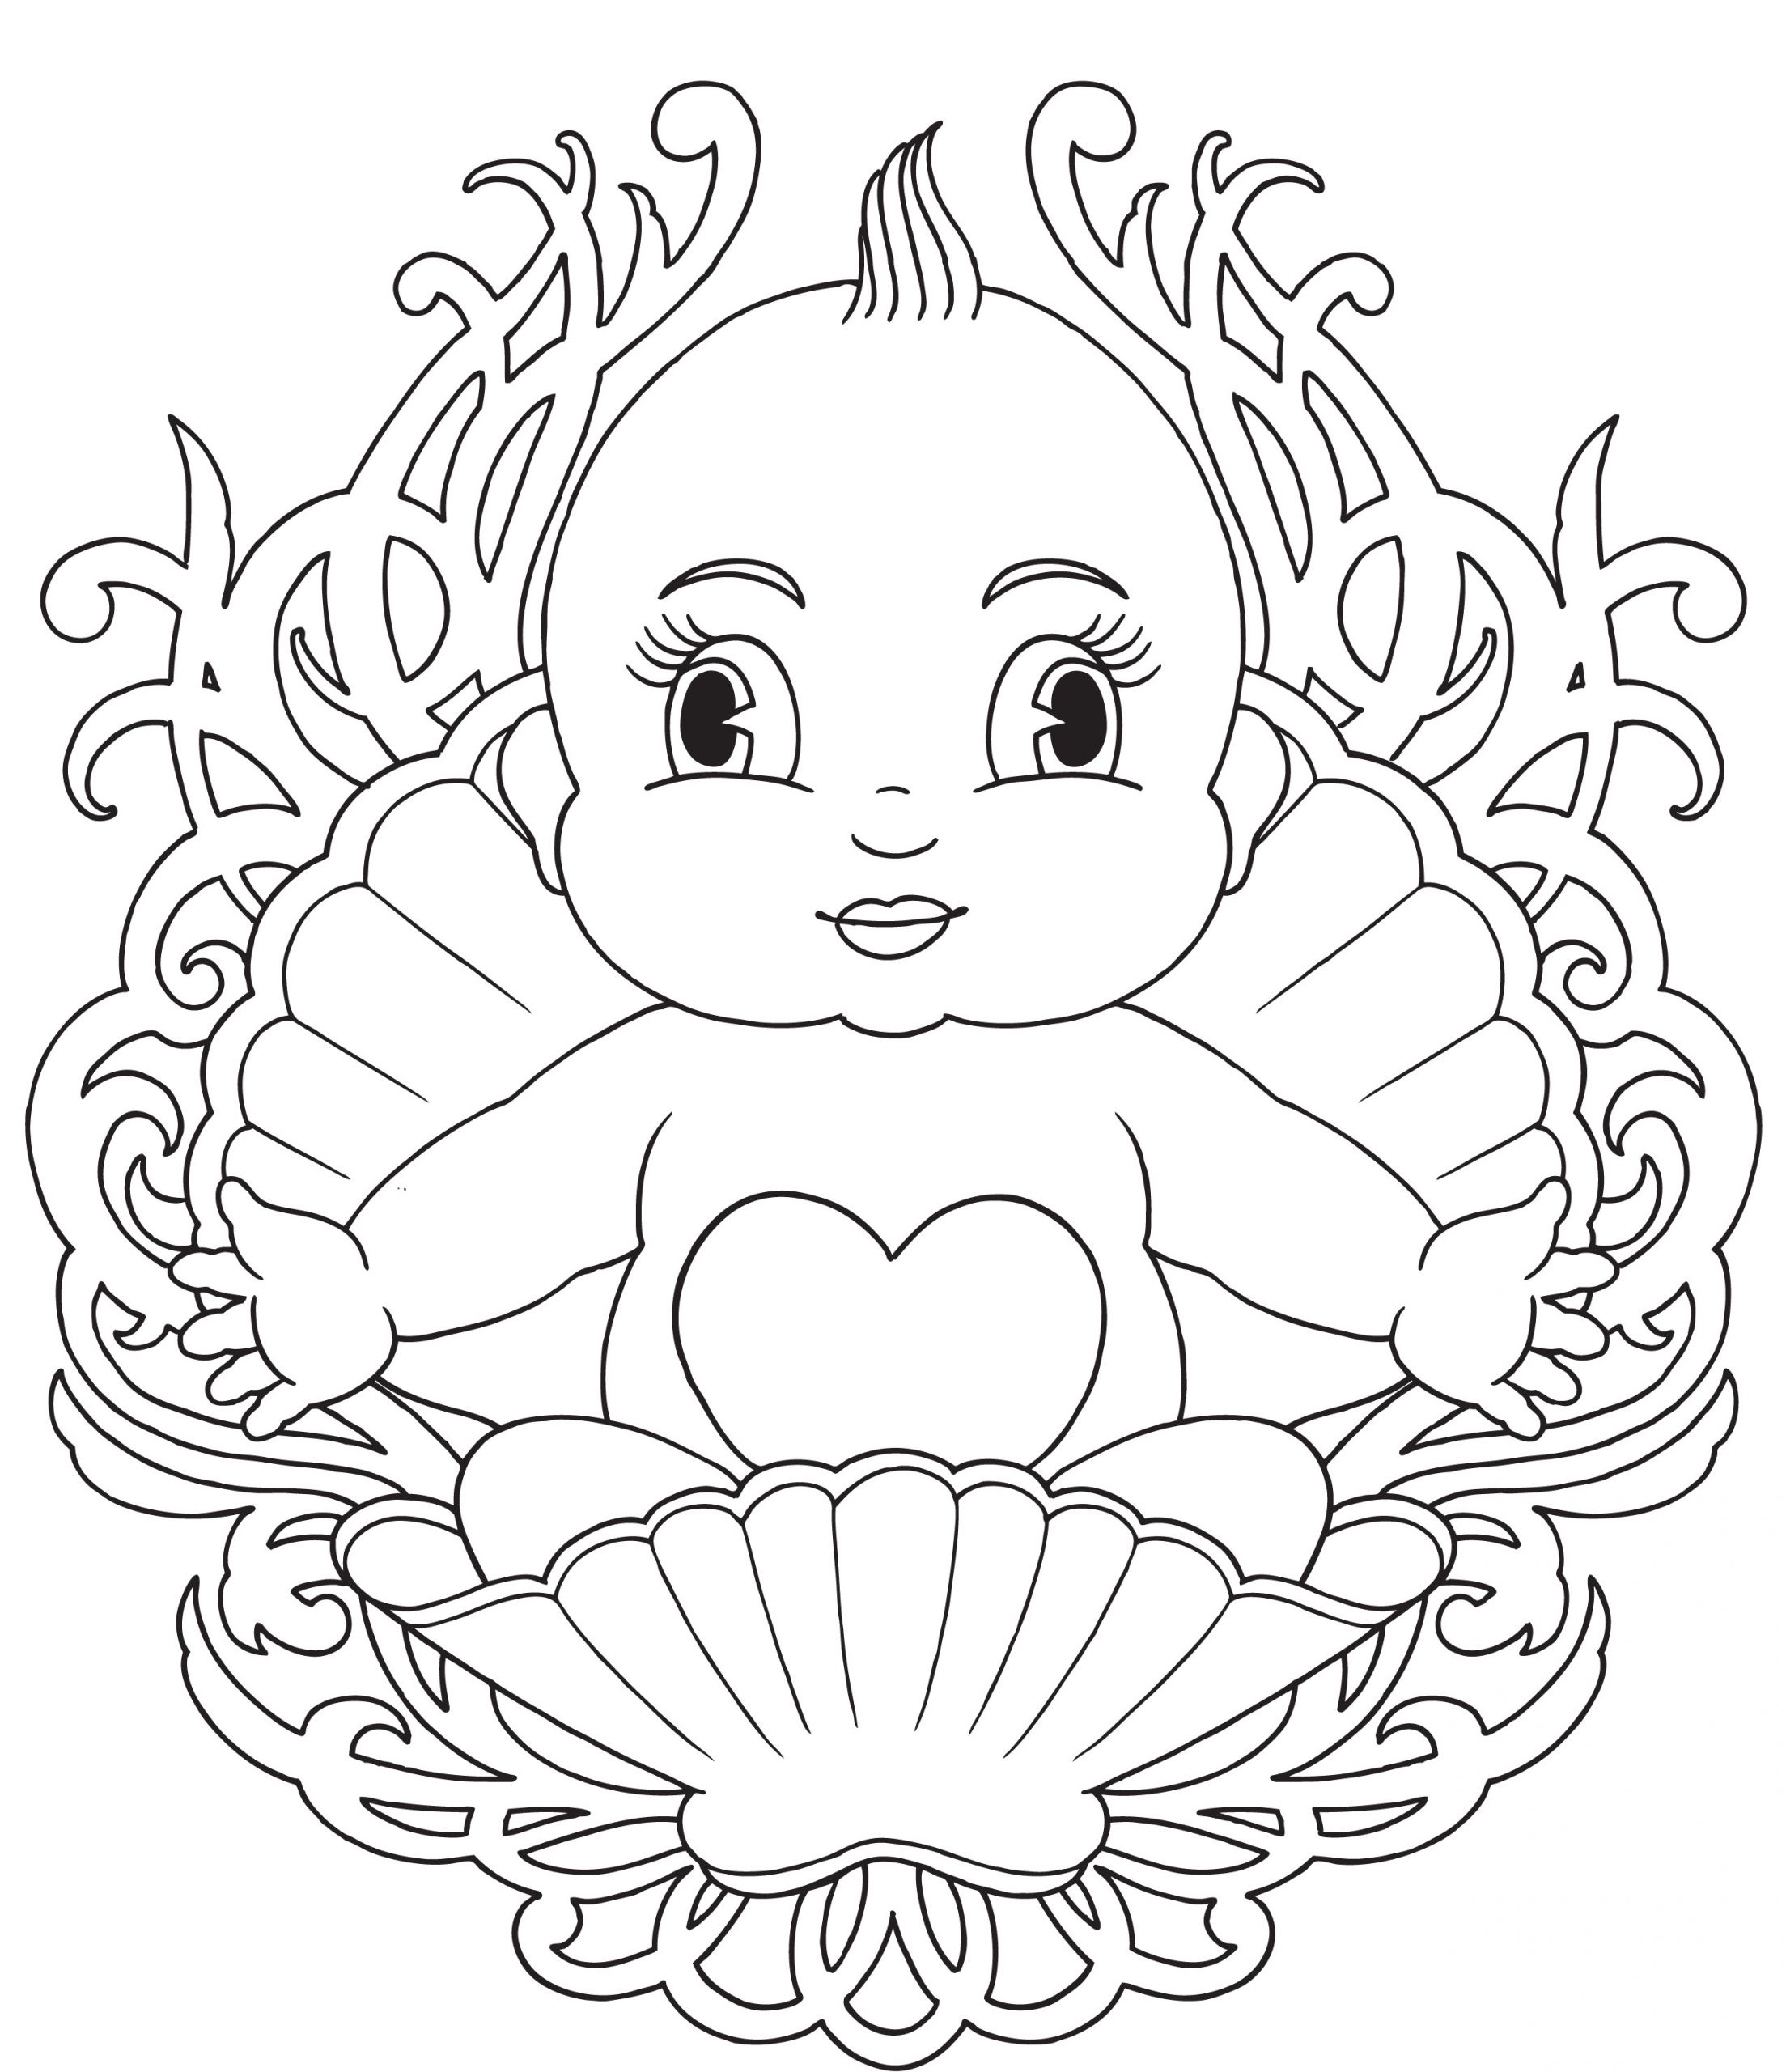 Baby Coloring Sheet
 Free Printable Baby Coloring Pages For Kids